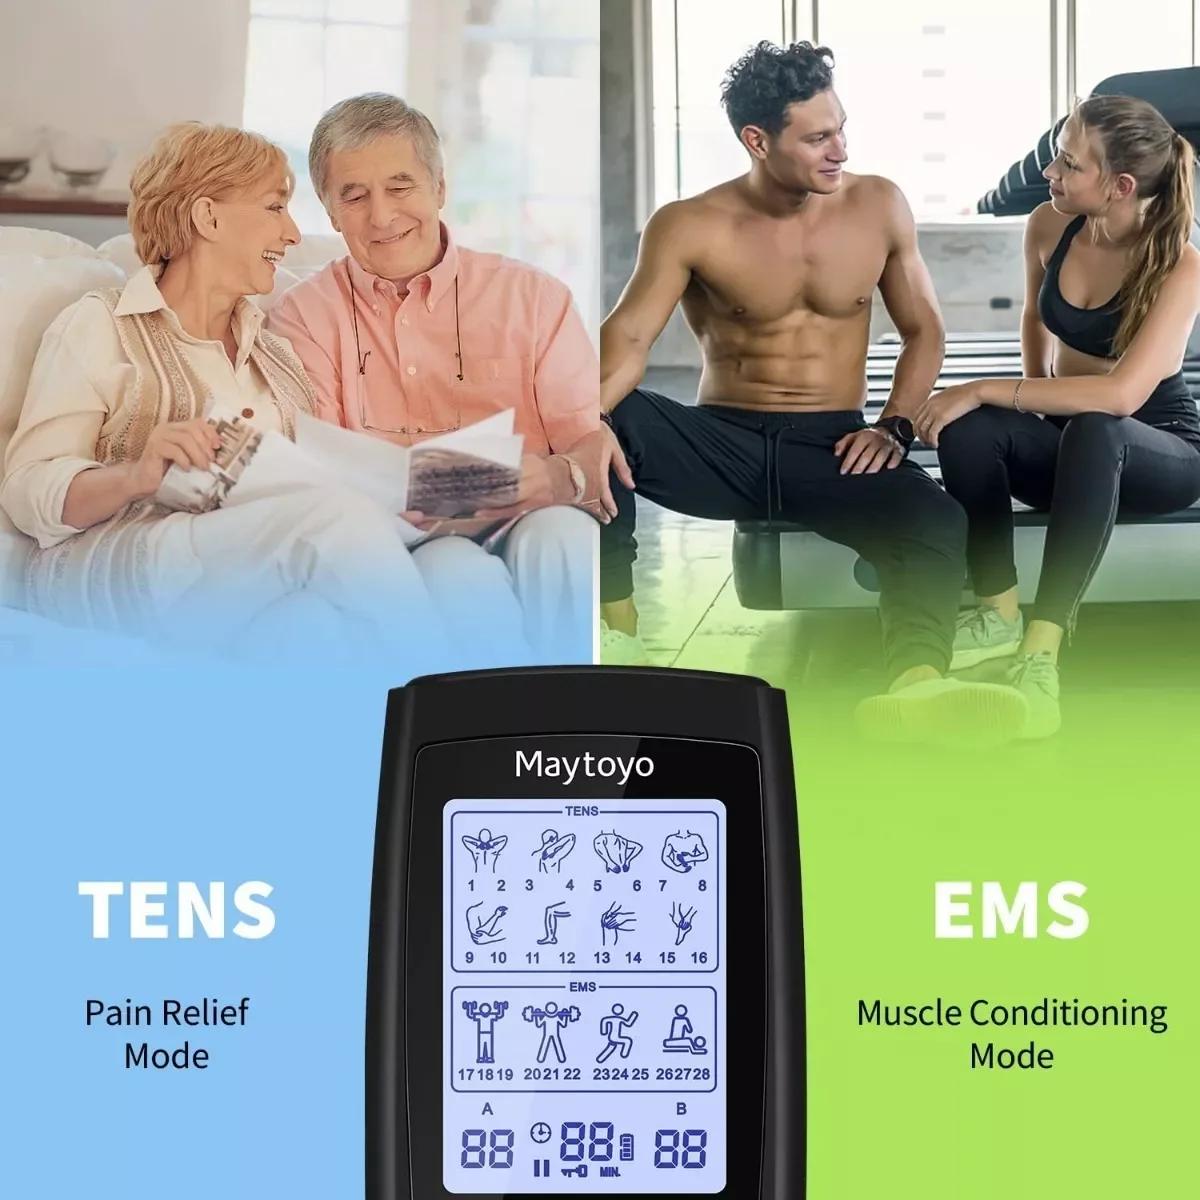 https://ae01.alicdn.com/kf/S204d39f095304e85b3eca71f81e68372G/TENS-EMS-Unit-Muscle-Stimulator-for-Pain-Relief-Therapy-Electric-28-Modes-Massager-with-Continuous-Stable.png